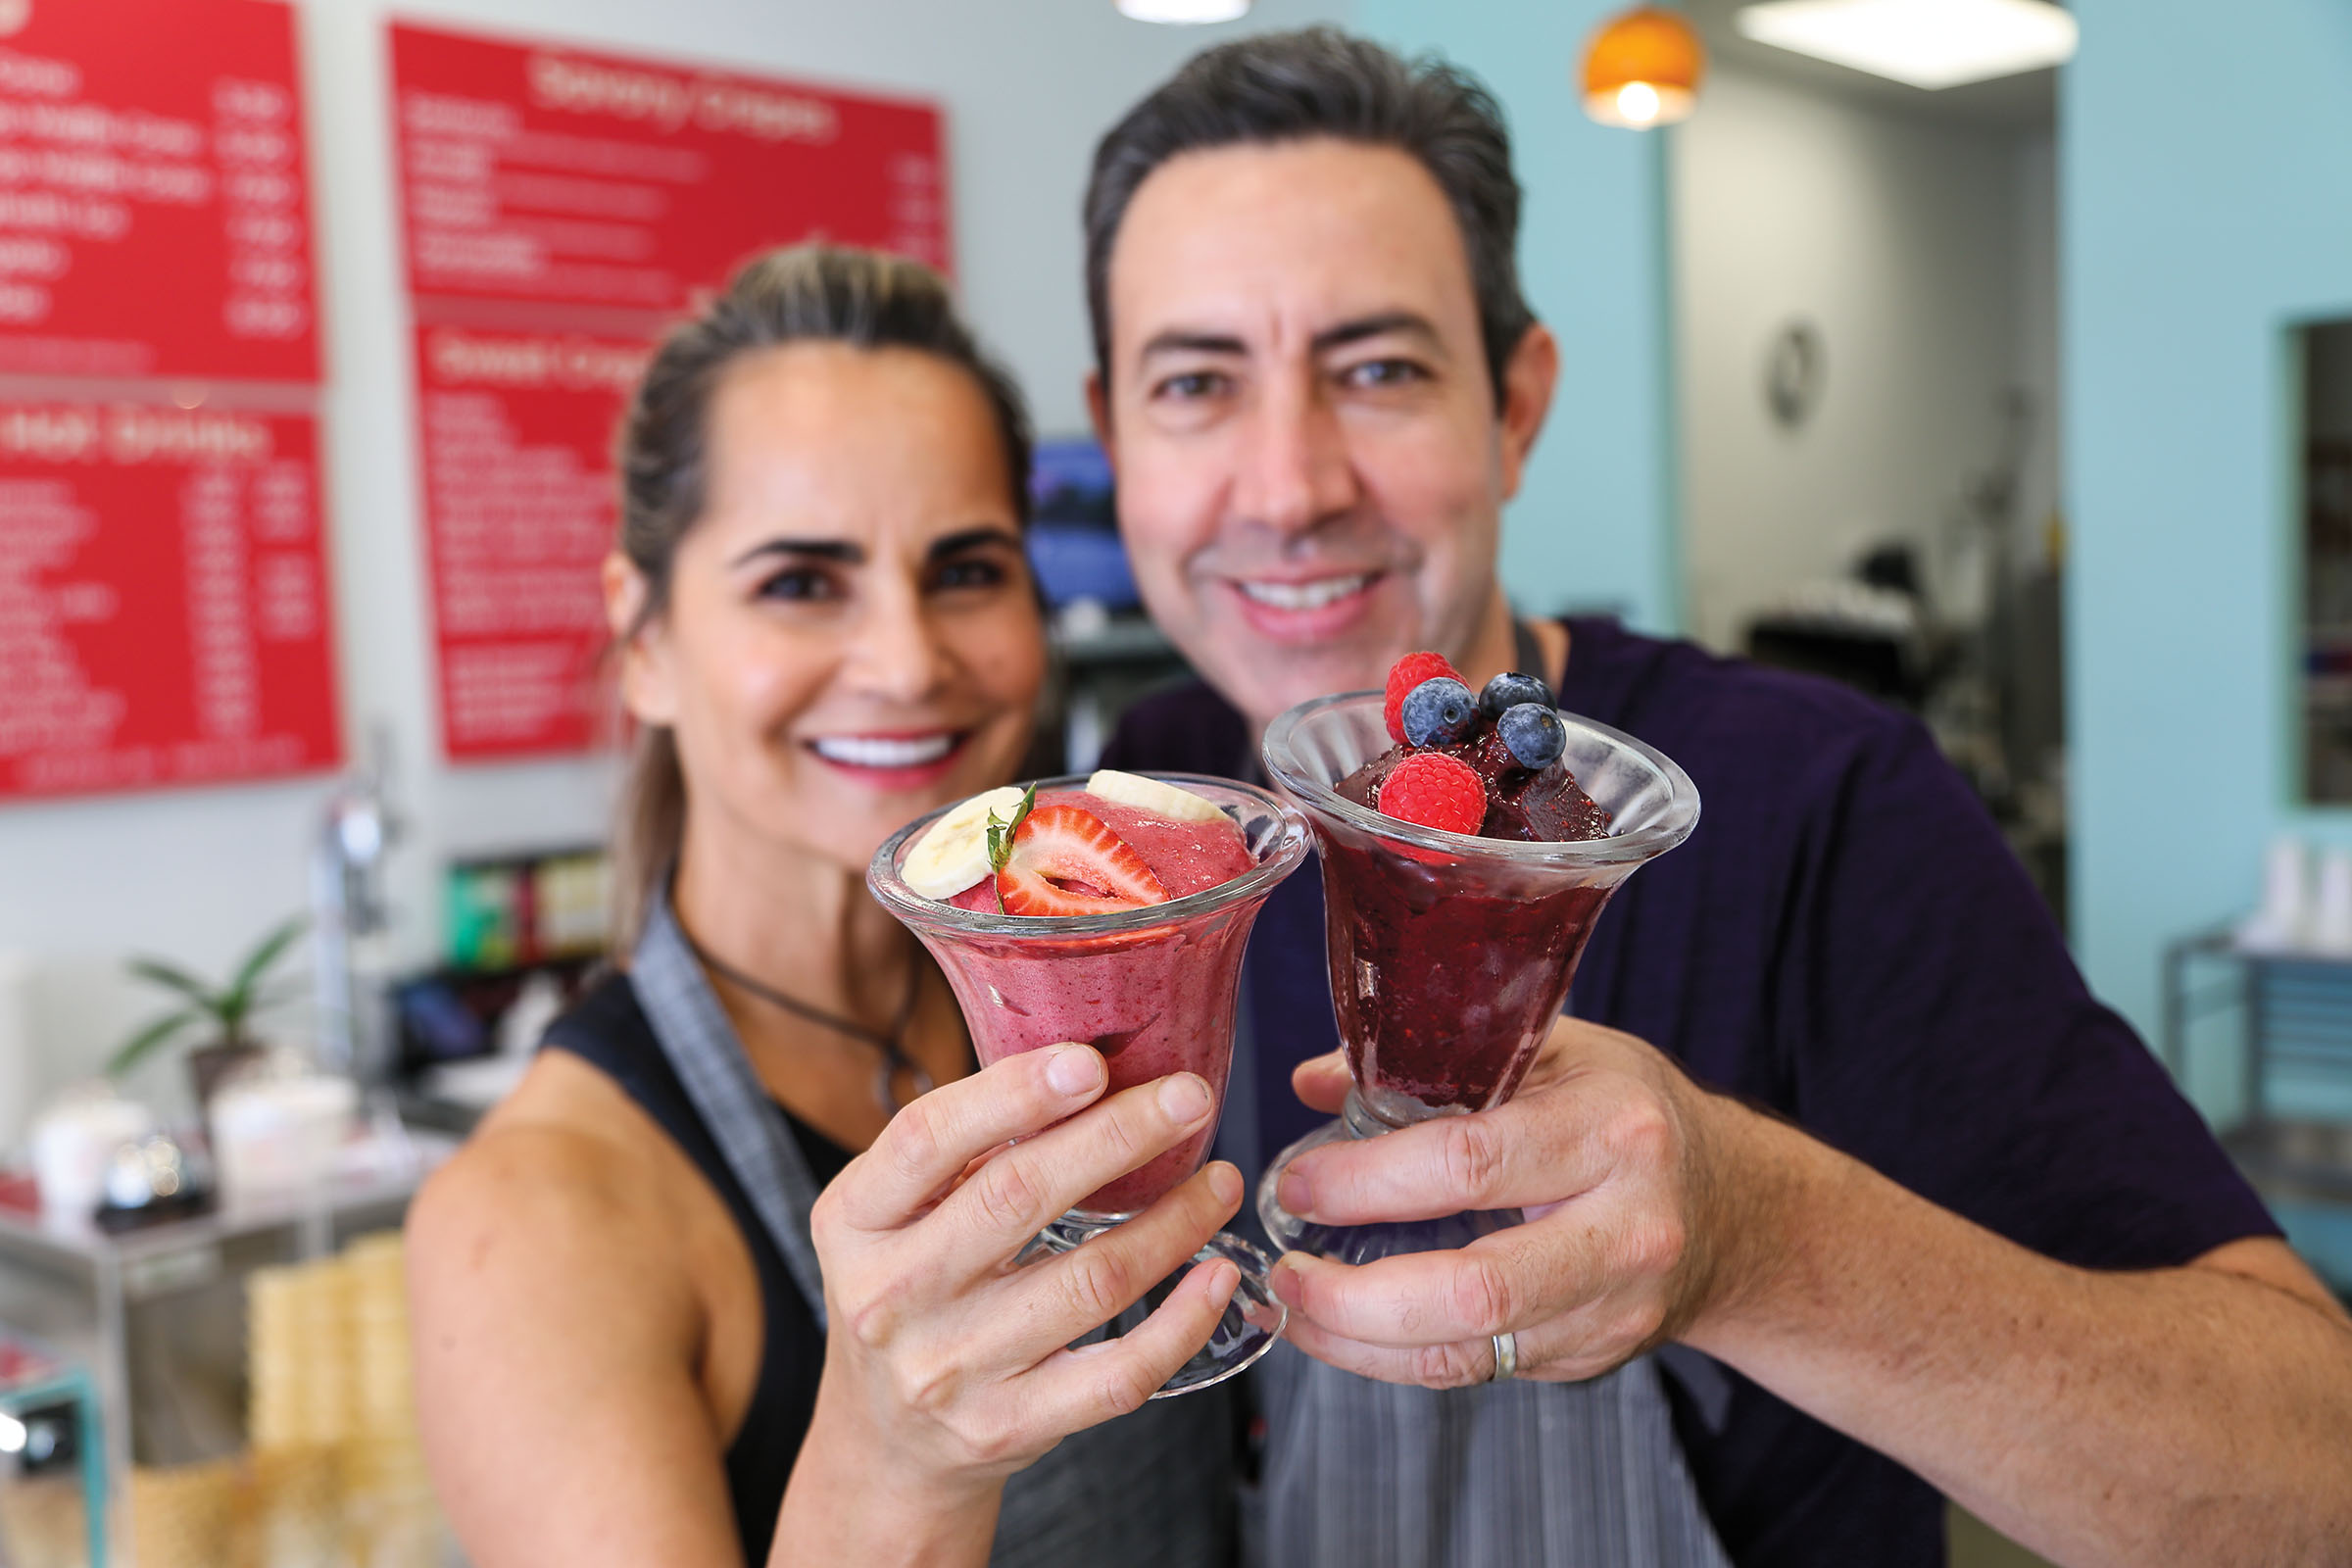 The owners of Zenzero pose with fruit and gelato in a glass dish